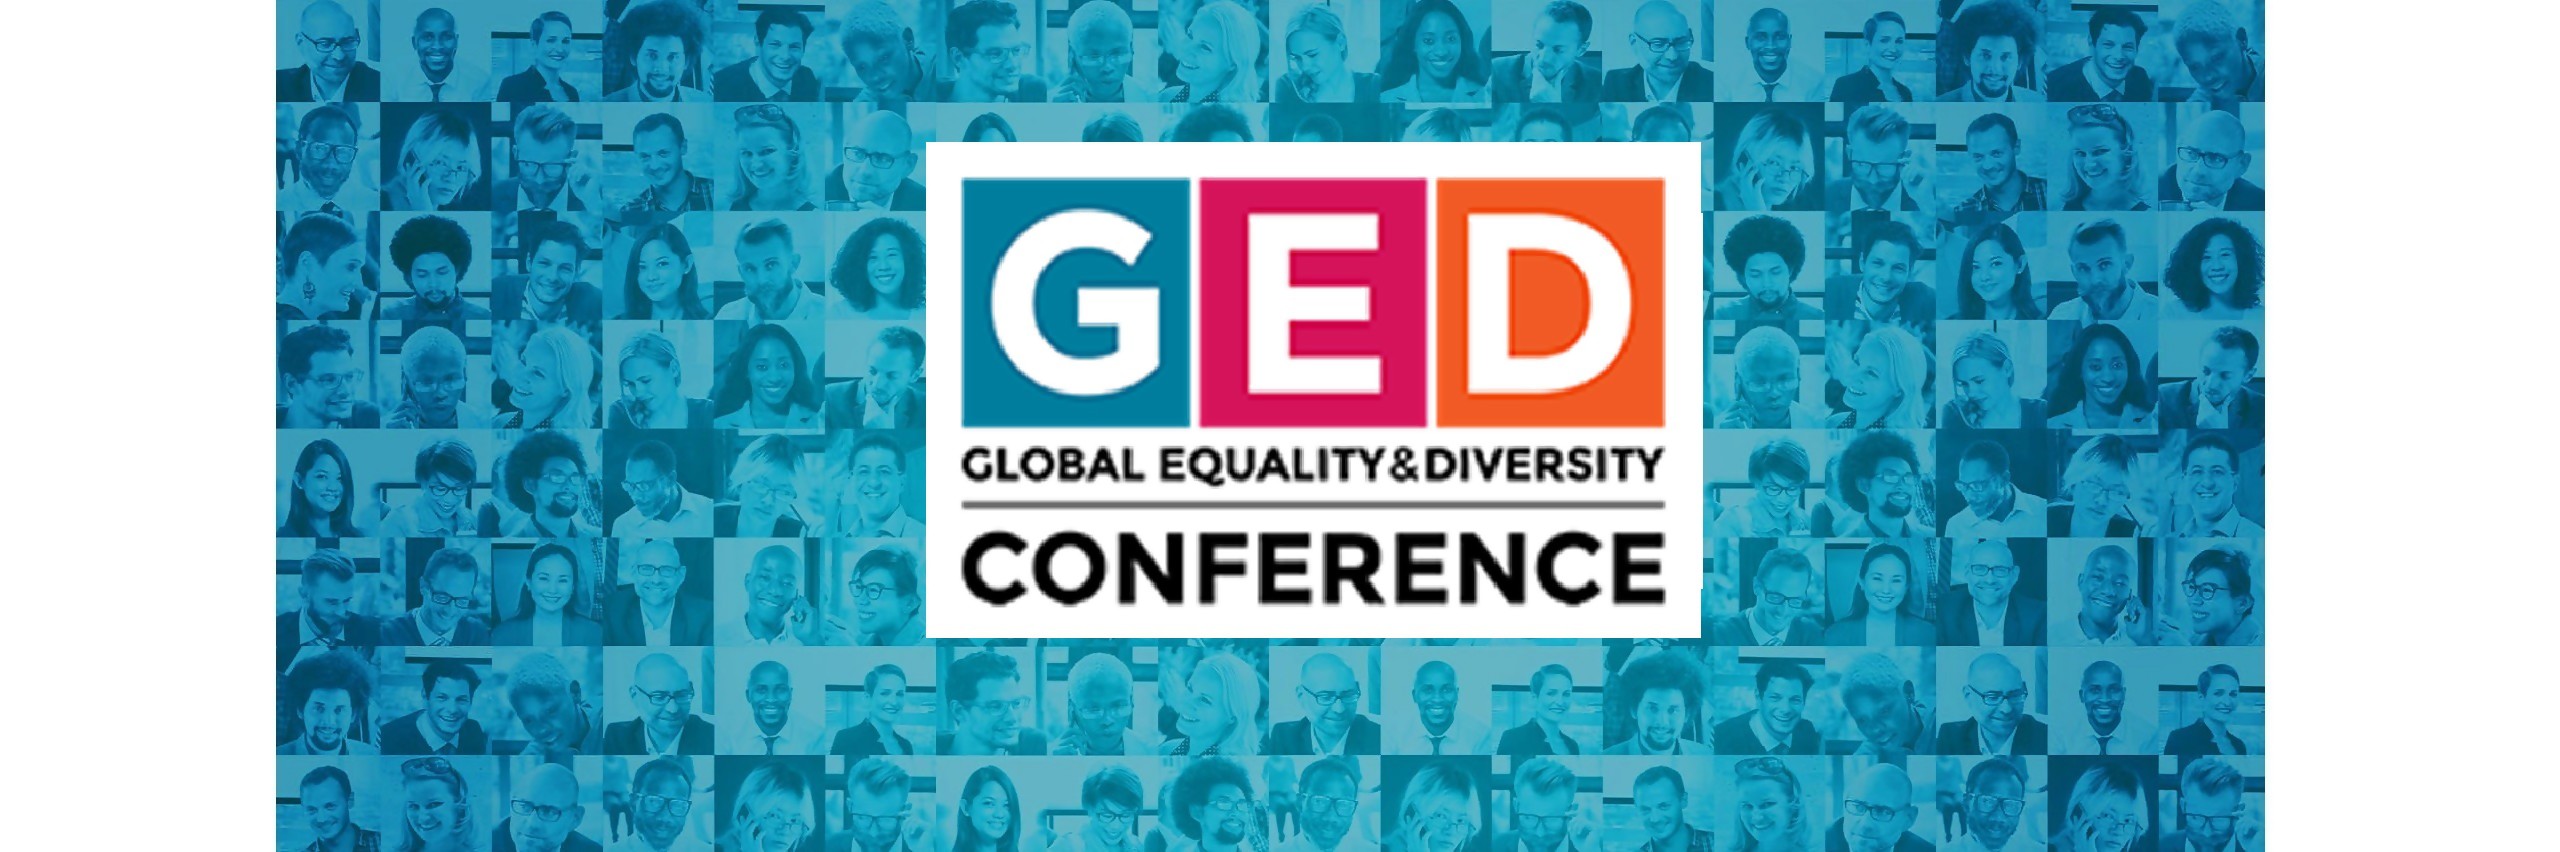 GED Conference London 2017